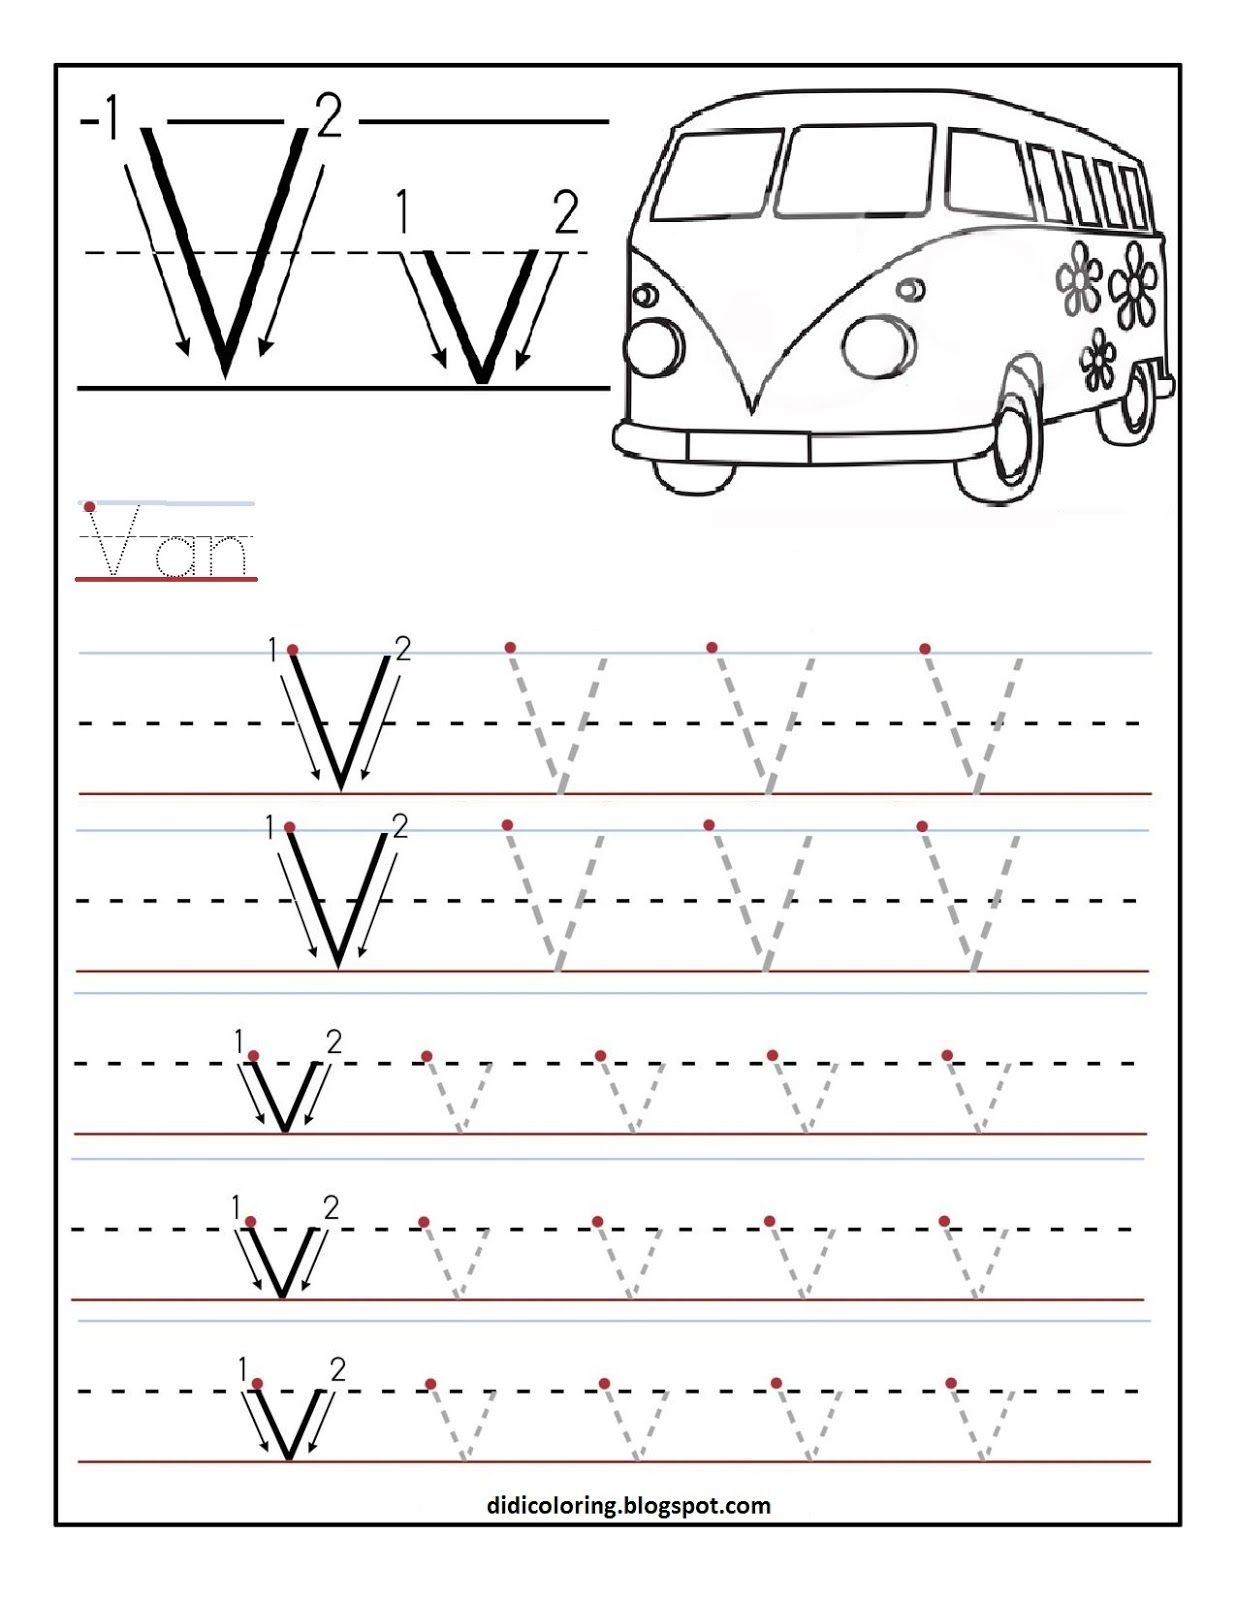 Free Printable Worksheet Letter V For Your Child To Learn And Write | Learn Your Letters Printable Worksheets